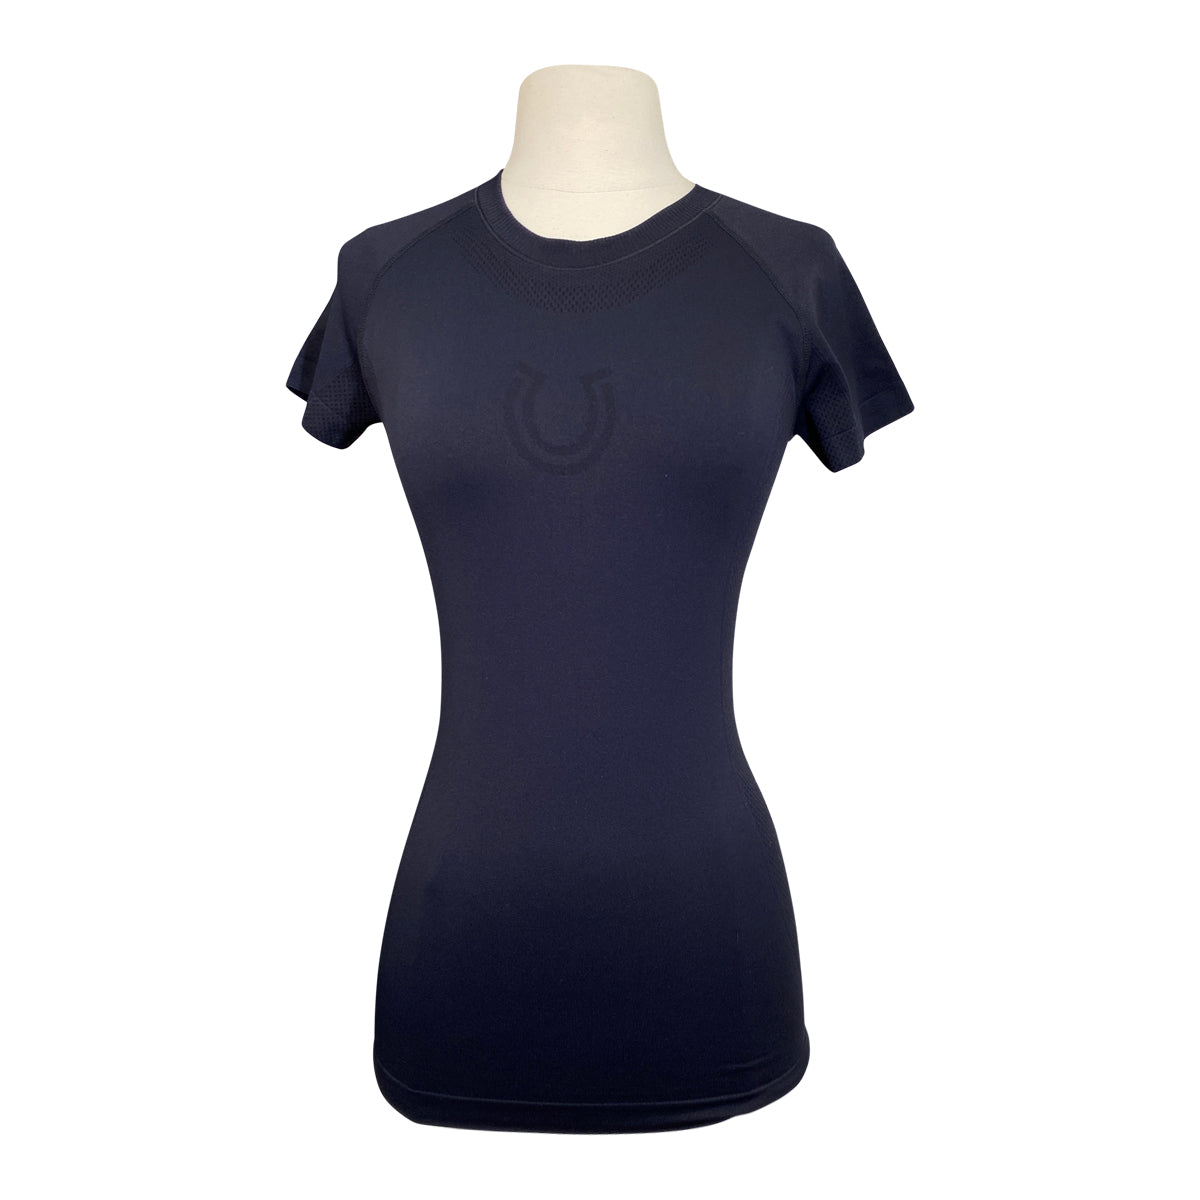 Front of FitEq Short Sleeve Seamless Schooling Top in Black - Women's S/M